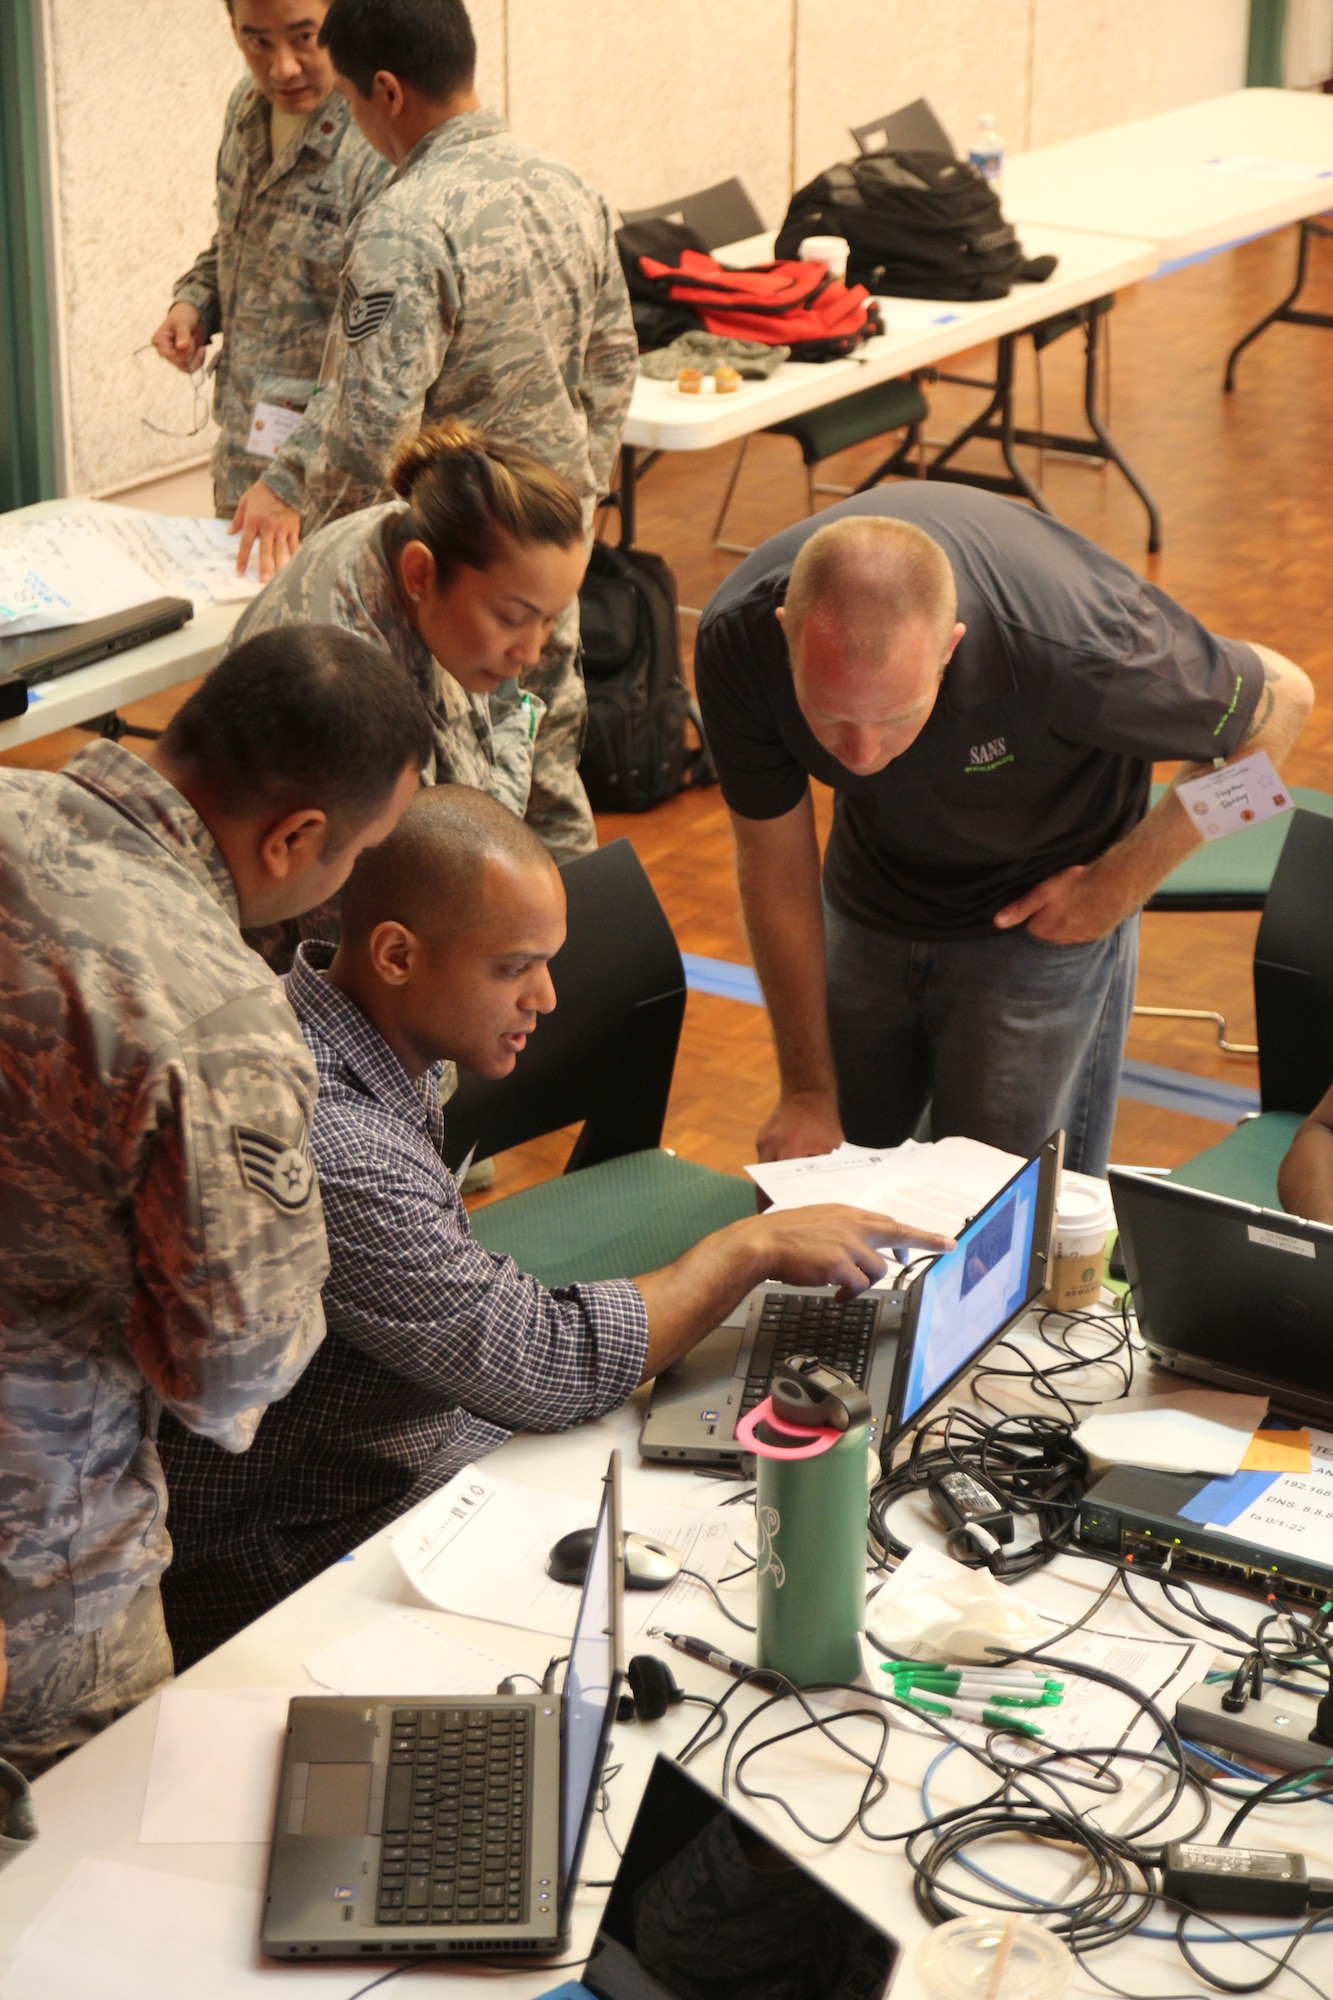 Hawaii Air National Guard airmen collaborate with civilians in the cyber security sector to defend against cyber attacks during the Po’oihe 2015 Cyber Security Exercise at the University of Hawaii Manoa Campus Center Ballroom on June 4, 2015. The exercise is a two-day event focused on the protection of commercial networks against cyber threats. It provides an opportunity for service members and industry professionals to discuss many of the challenges facing cyber security. (U.S. Air National Guard photo by Airman 1st Class Robert Cabuco)